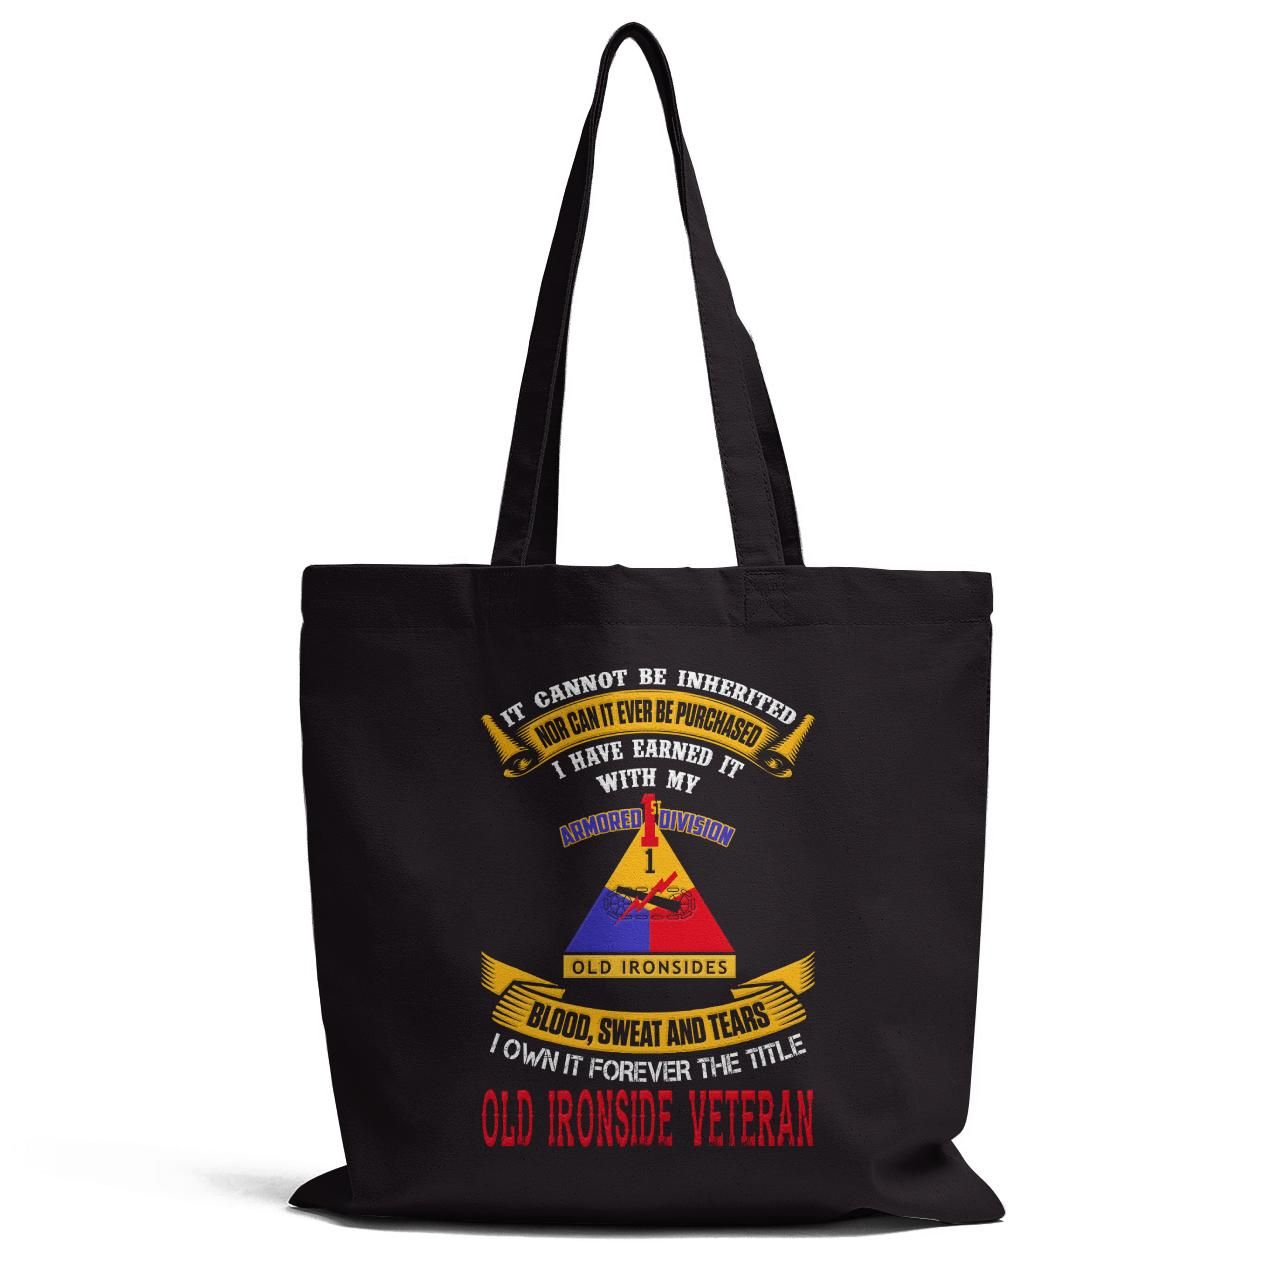 Old Ironside Veteran I Own It Forever The Title Tote Bag